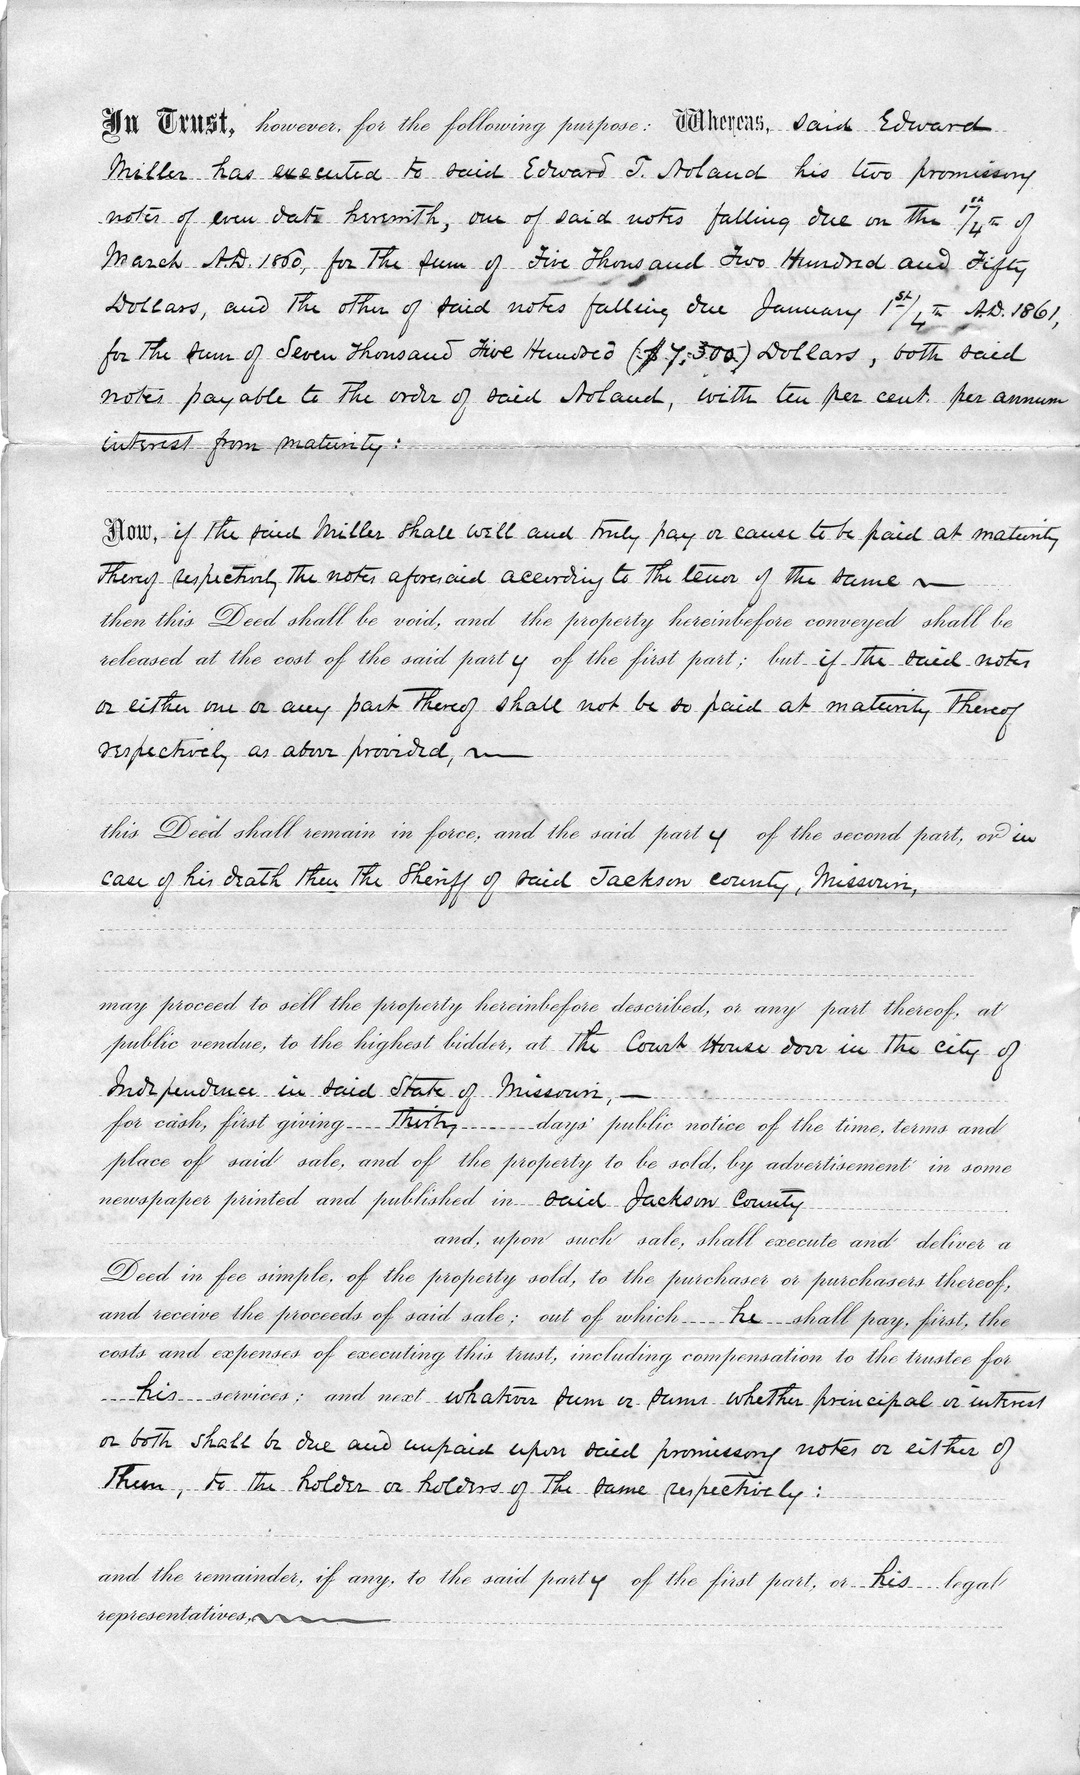 Deed of Trust from Edward Miller and Wife to Edward T. Noland